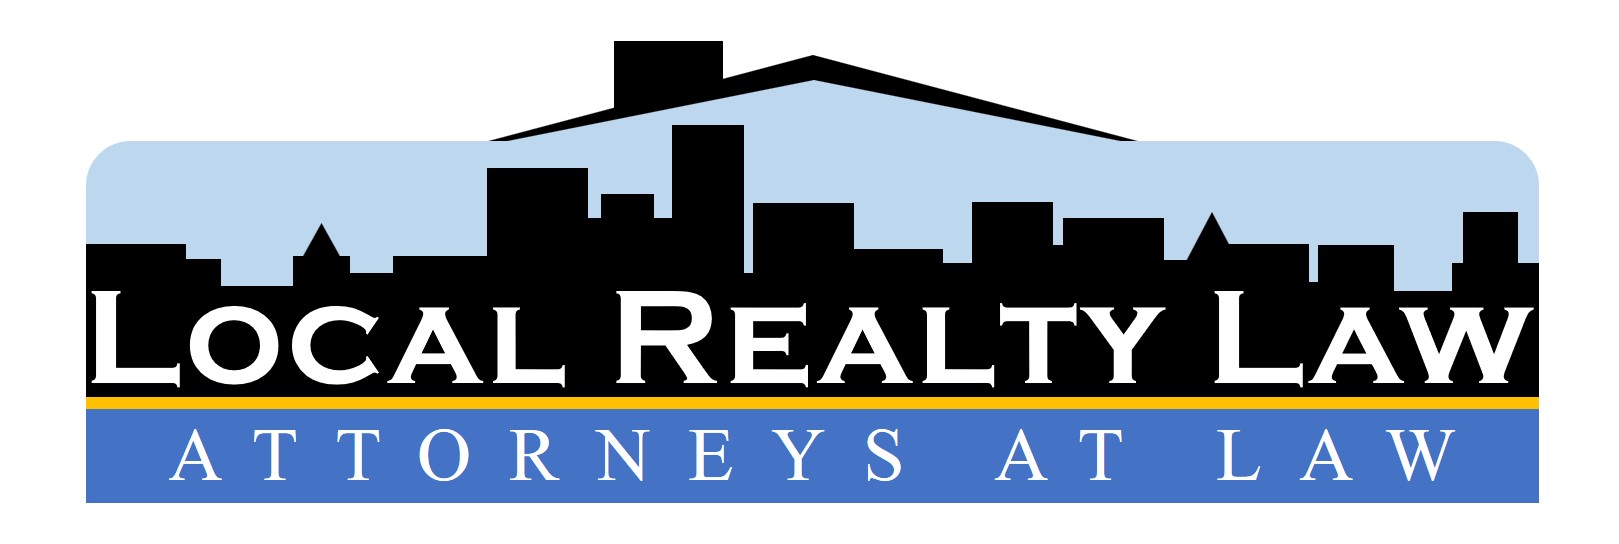 Local Realty Law